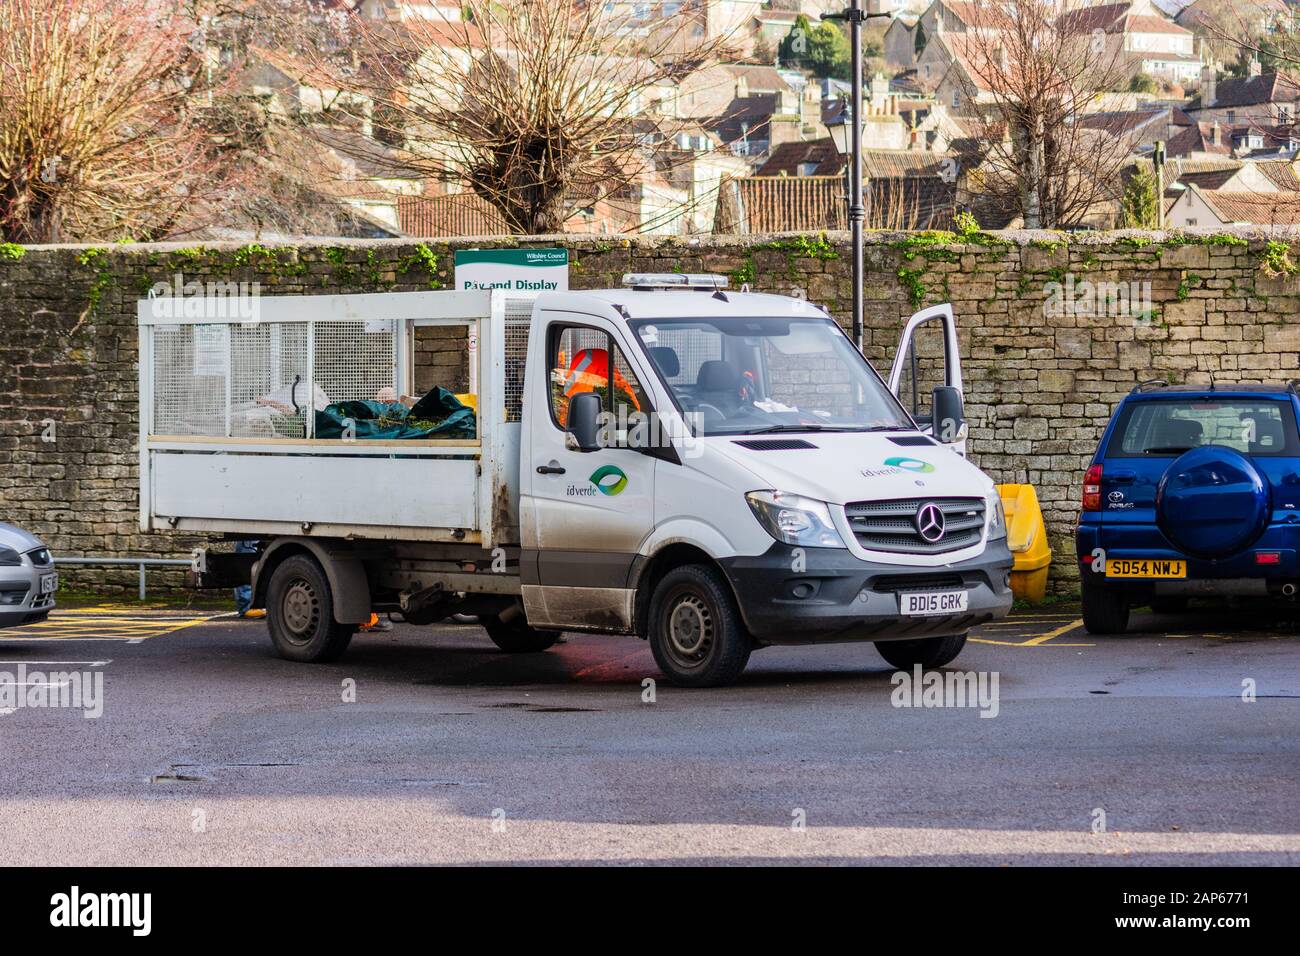 A Mercedes caged flatbed truck with the company logo "Id Verde" on the door  stopped in a car park in Bradford on Avon as the staff carry out grounds  Stock Photo -